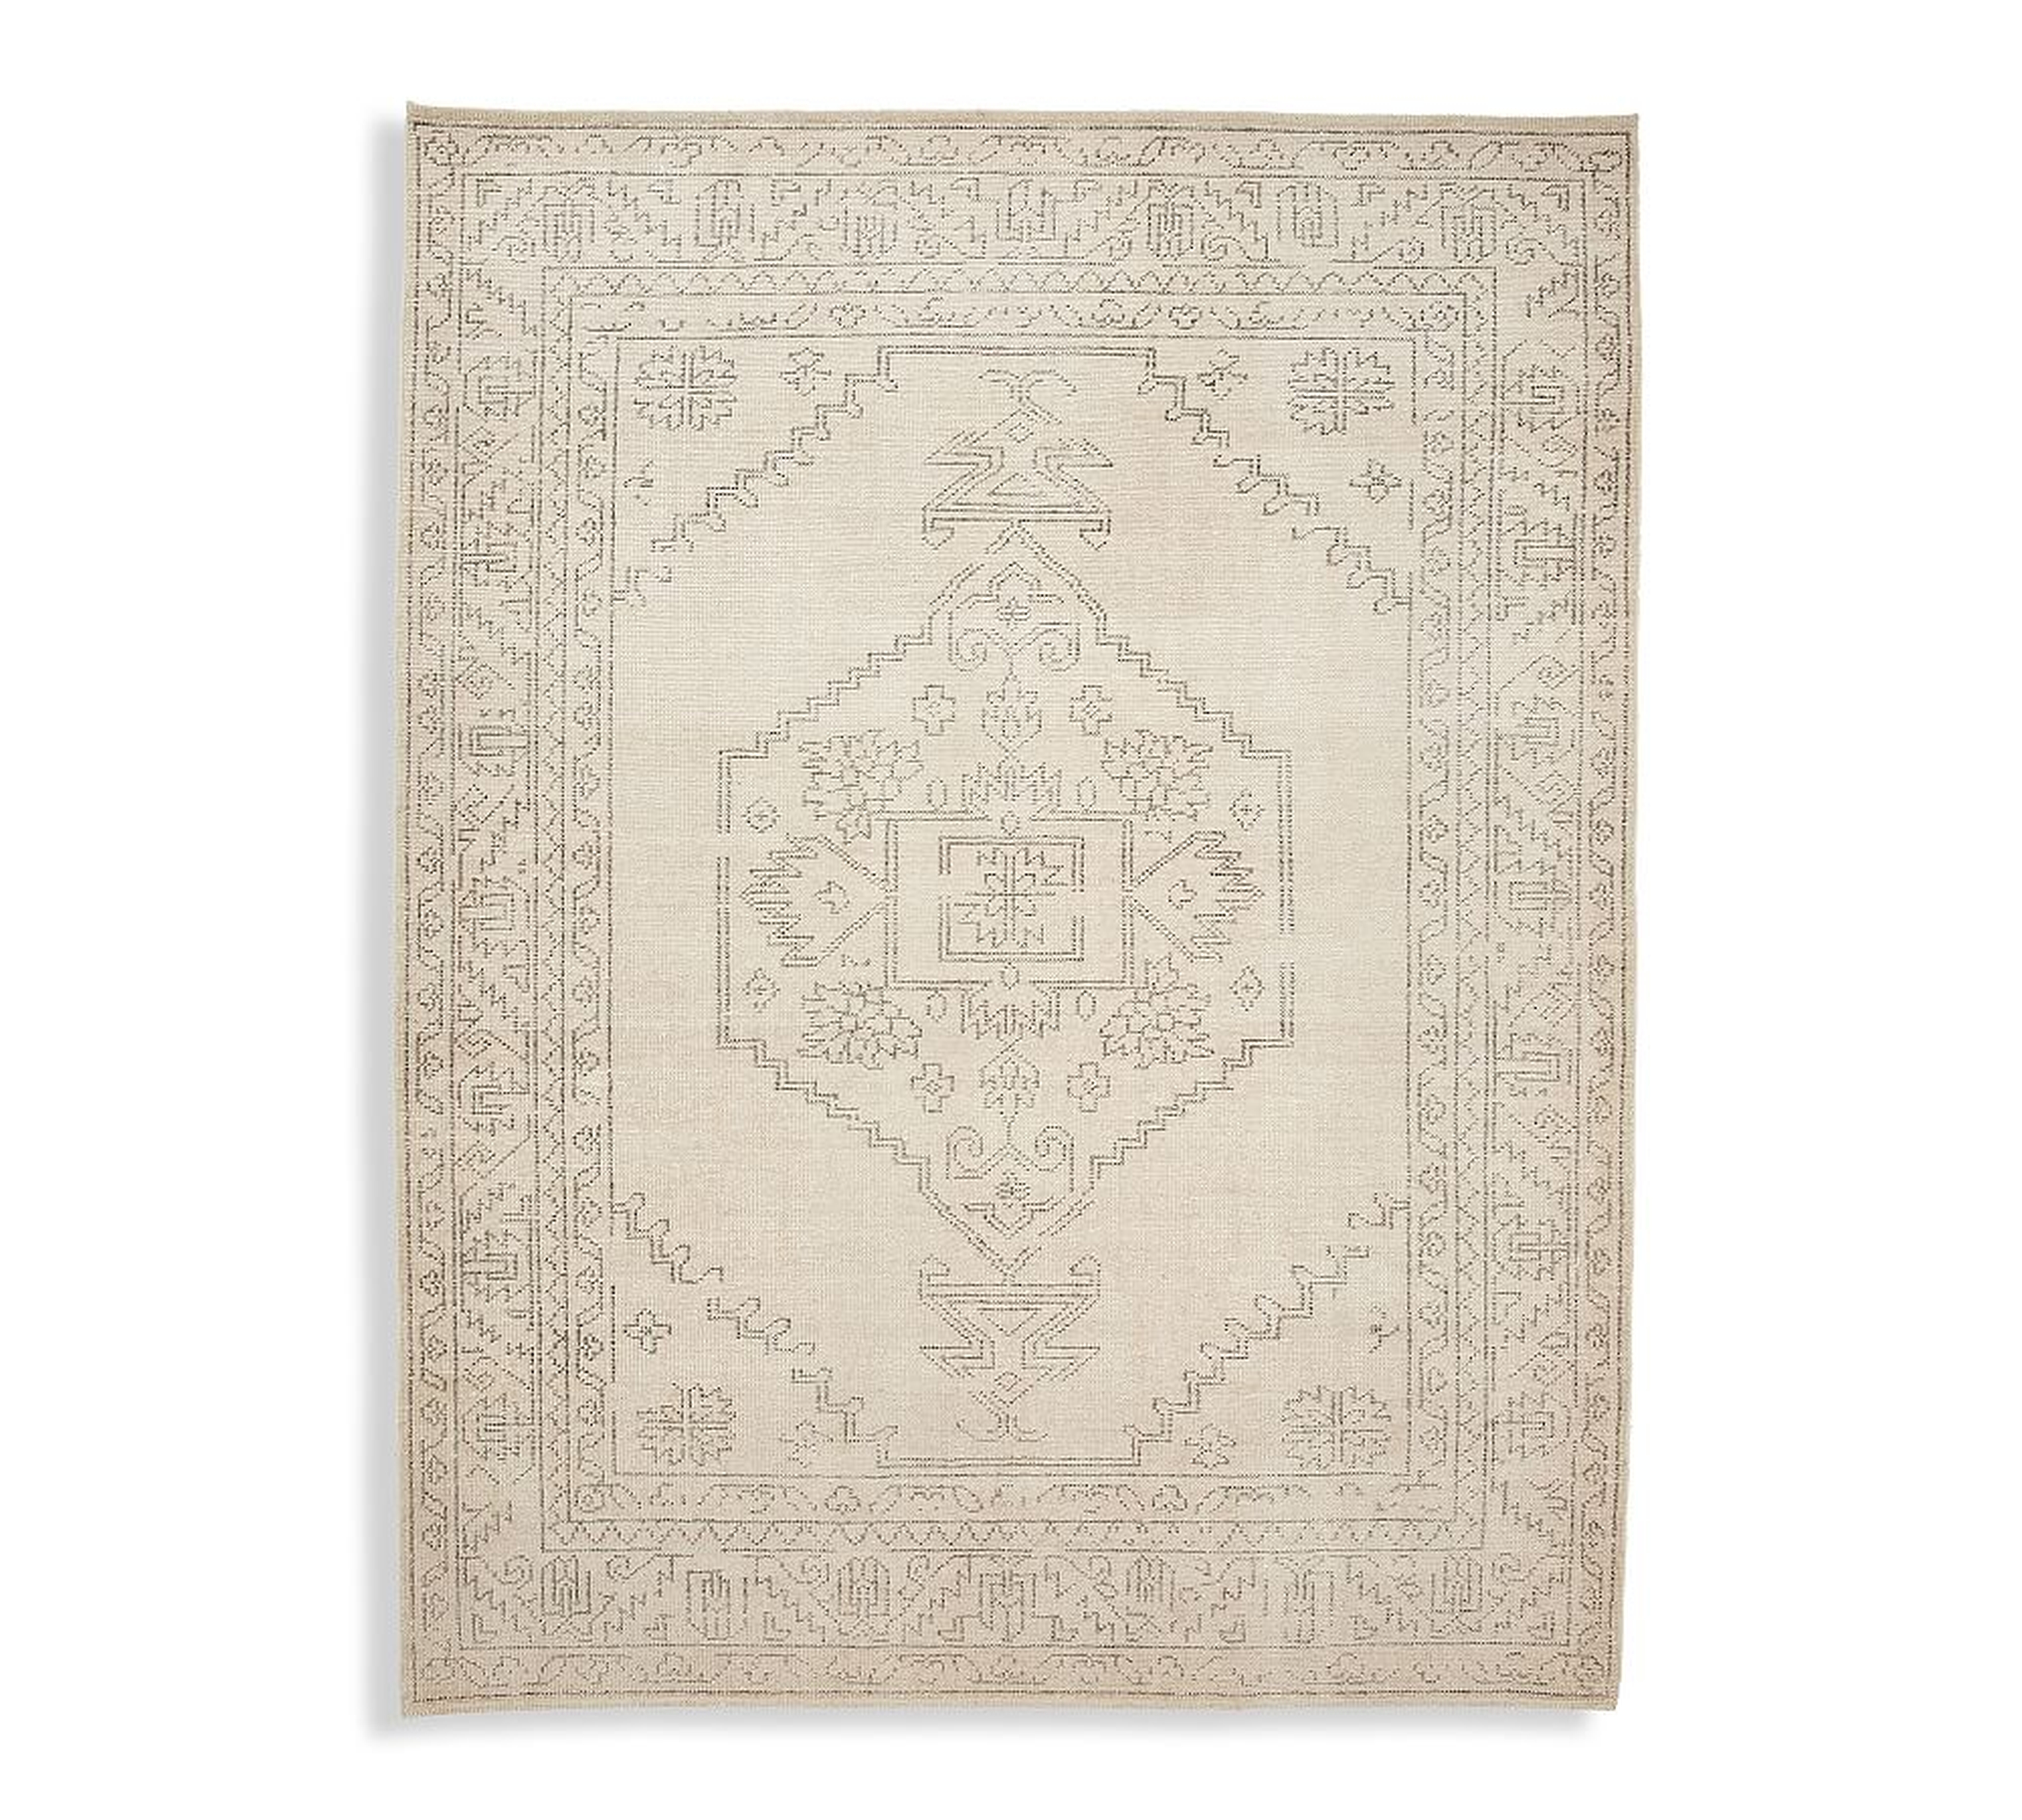 Emeline Handknotted Rug, 9x12, Charcoal Multi - Pottery Barn